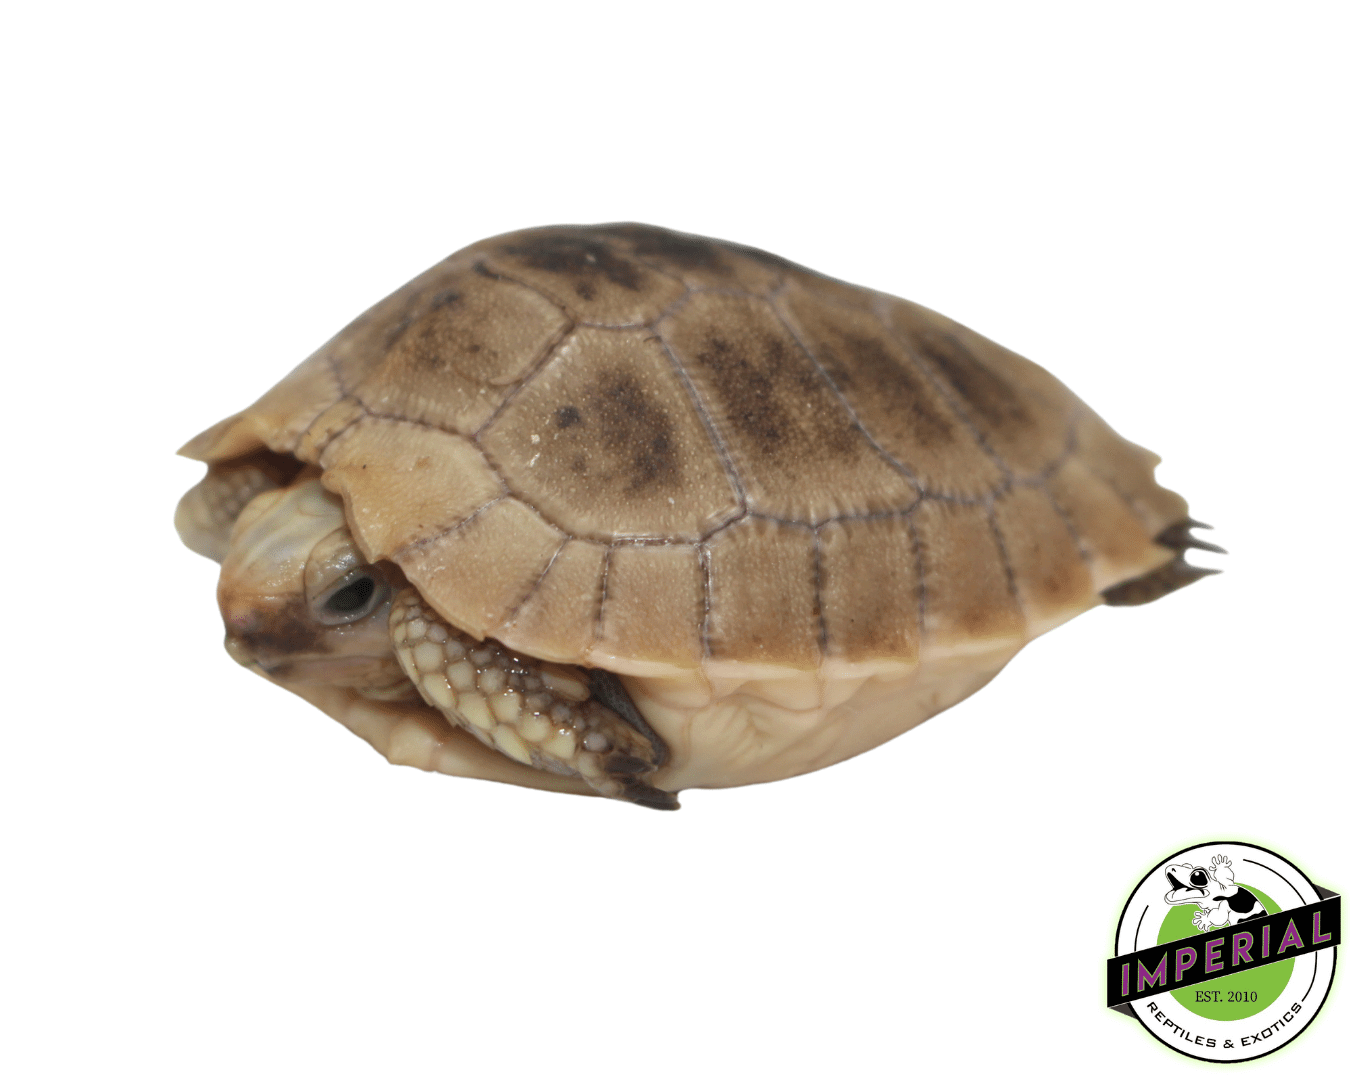 elongated tortoise for sale, buy reptiles online